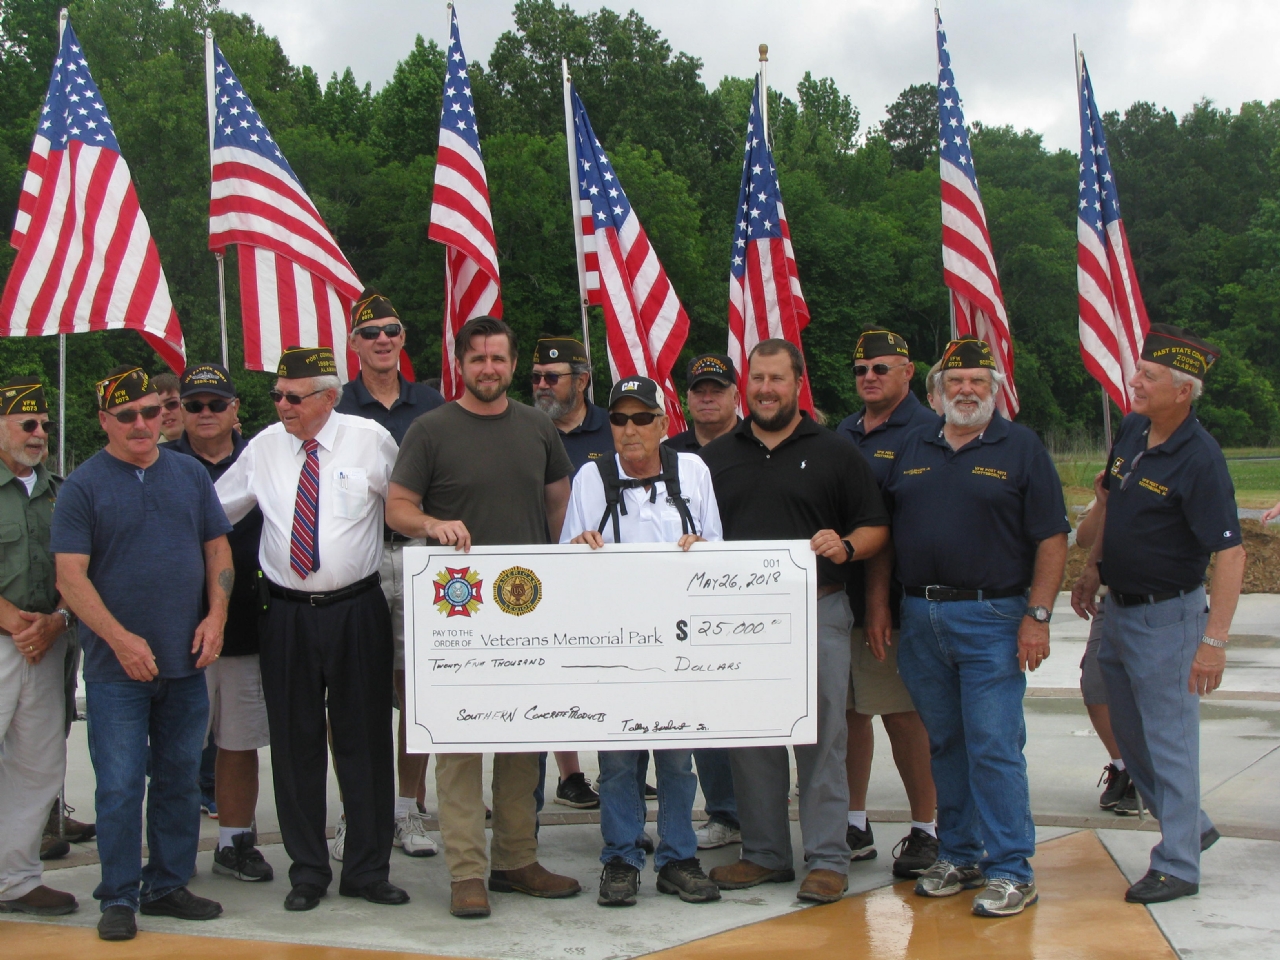 Members of VFW Post 6073 accept a Platinum donation to the Veterans Memorial Park during a celebration for the start of installation of the first inscribed brick pavers that have been purchased as a fund raiser for the park.